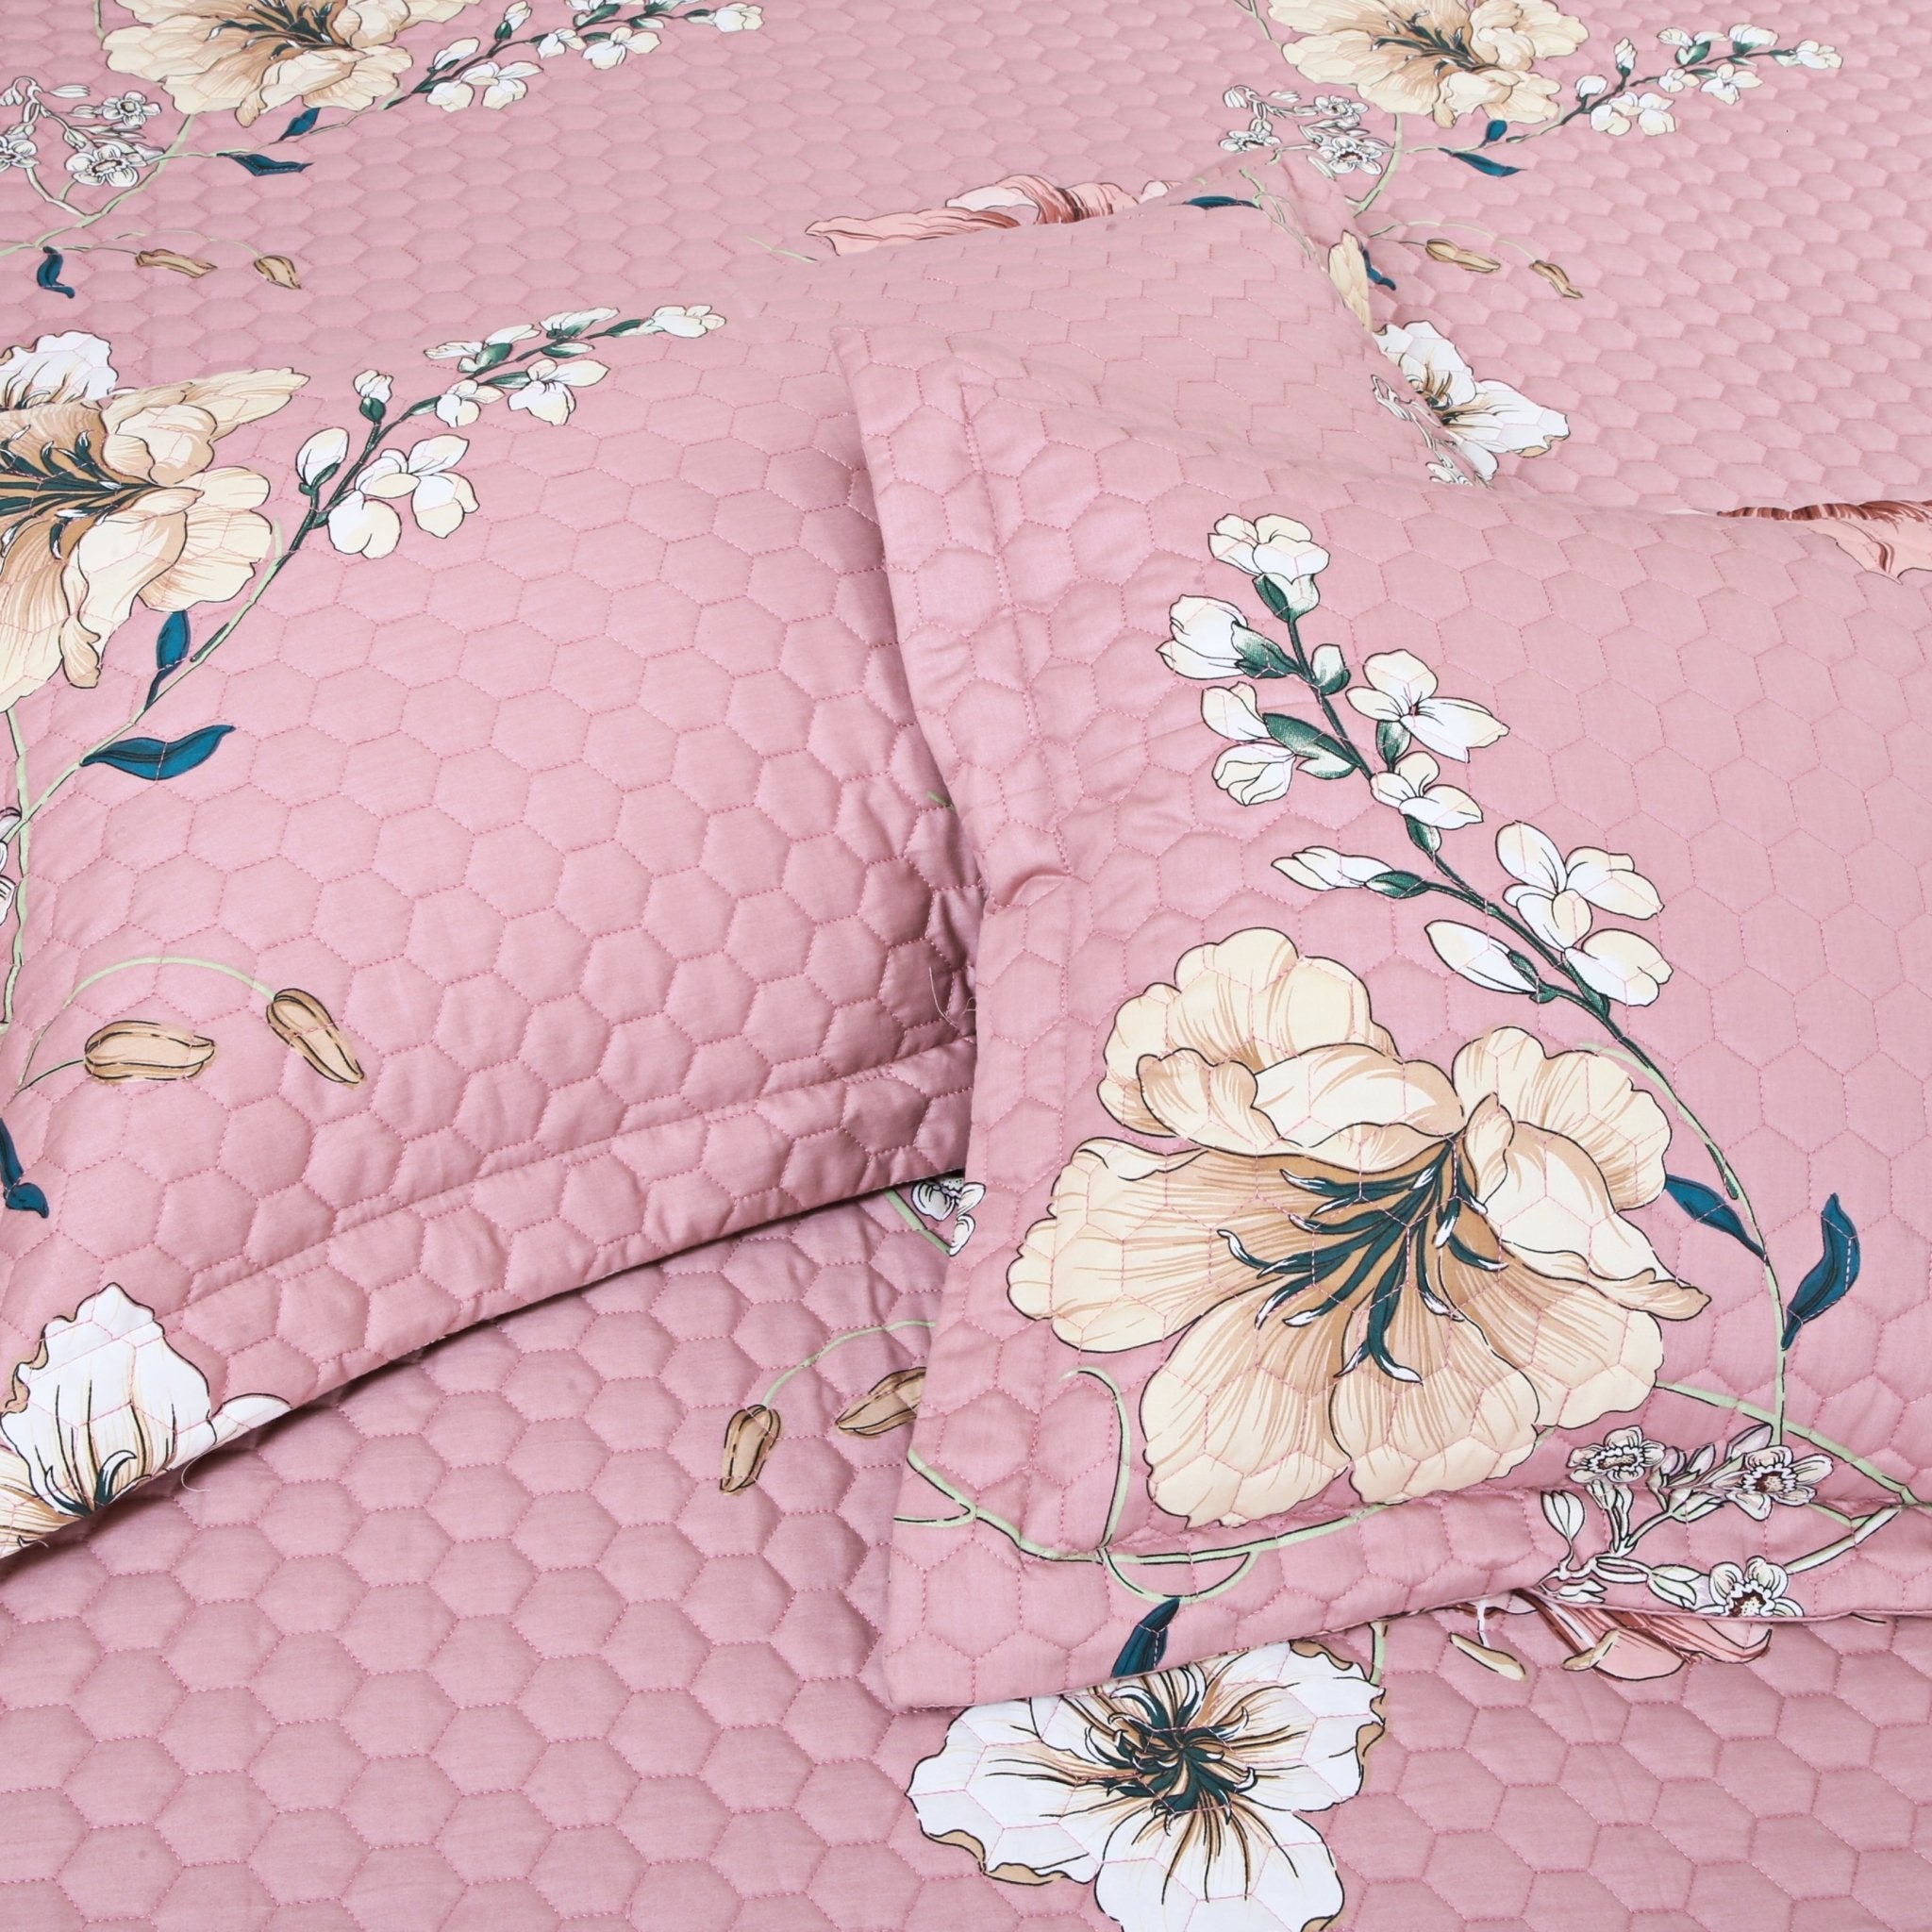 Malako Royale Quilted Bed Cover - Pink Floral 100% Cotton King Size Bedspread - MALAKO